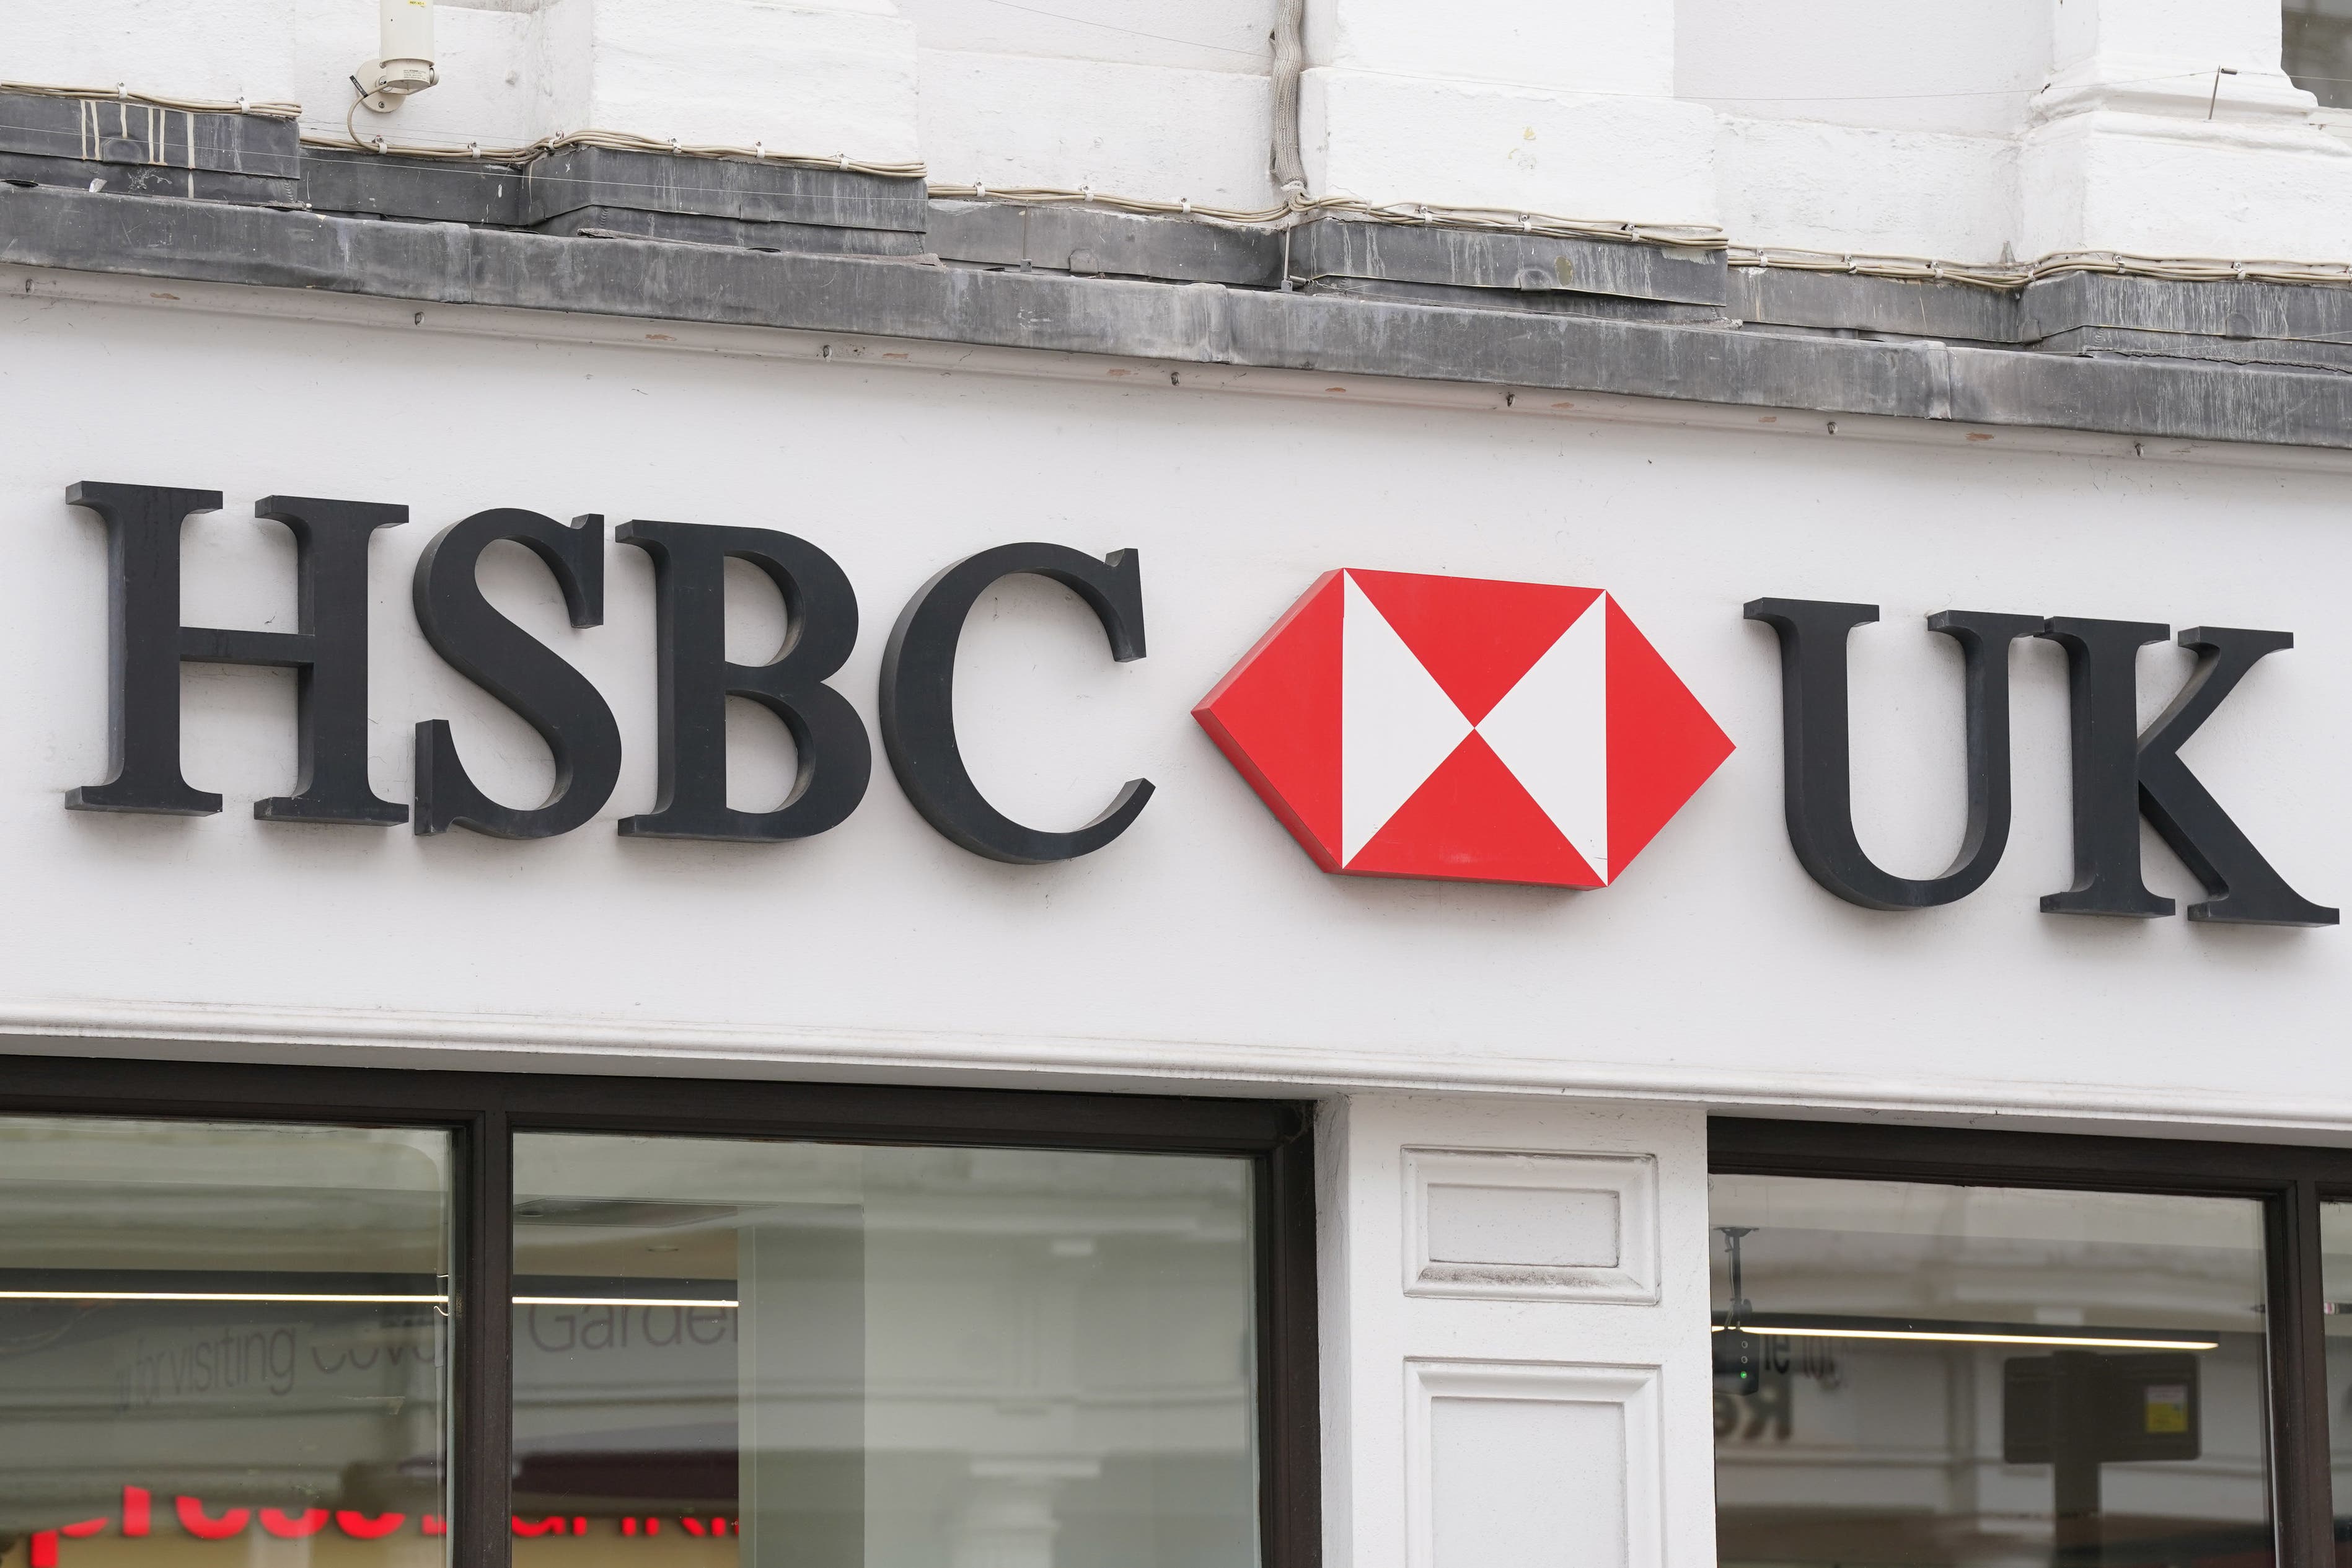 Hsbc Uk Says Banking Services Are Returning After Black Friday Outage The Independent 6037